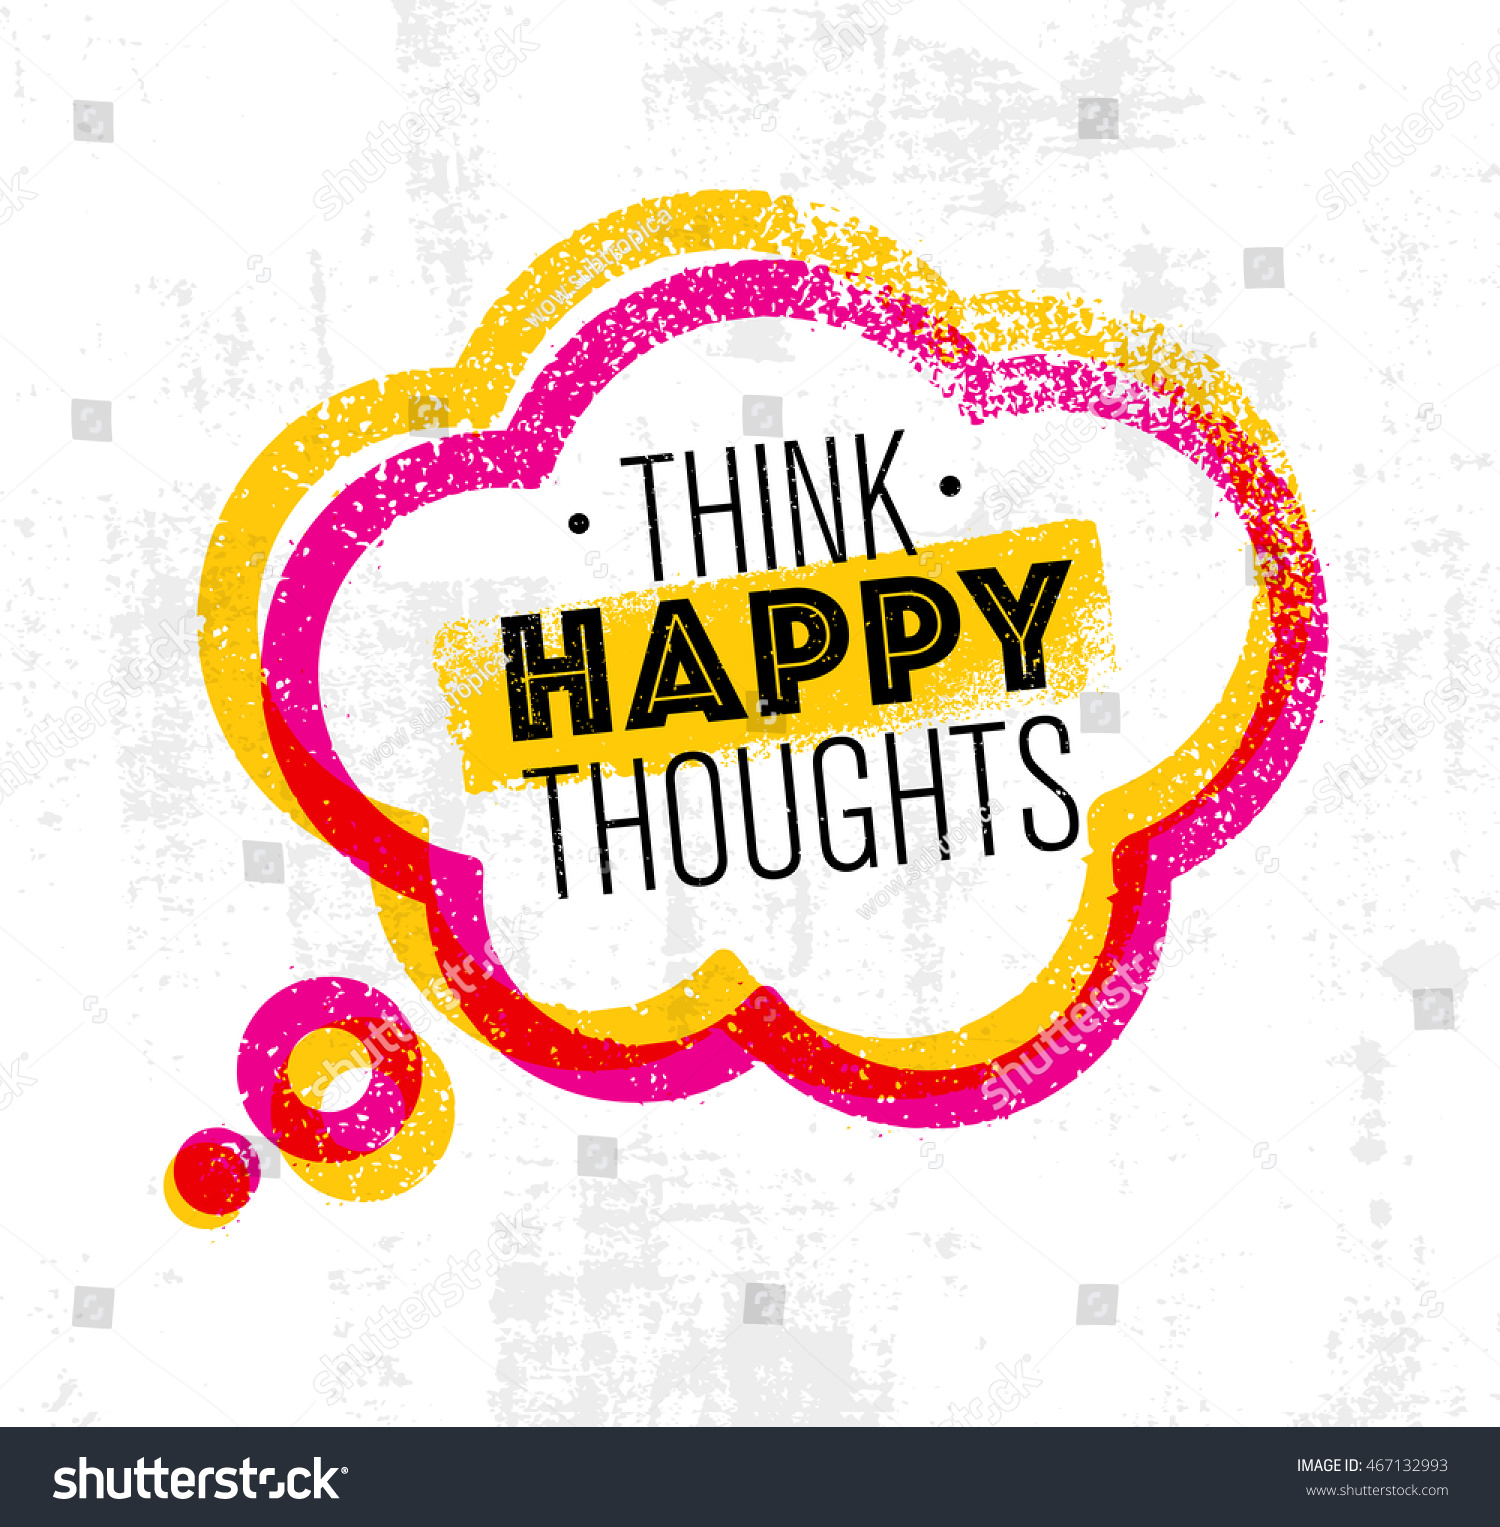 happy thoughts clipart - photo #5